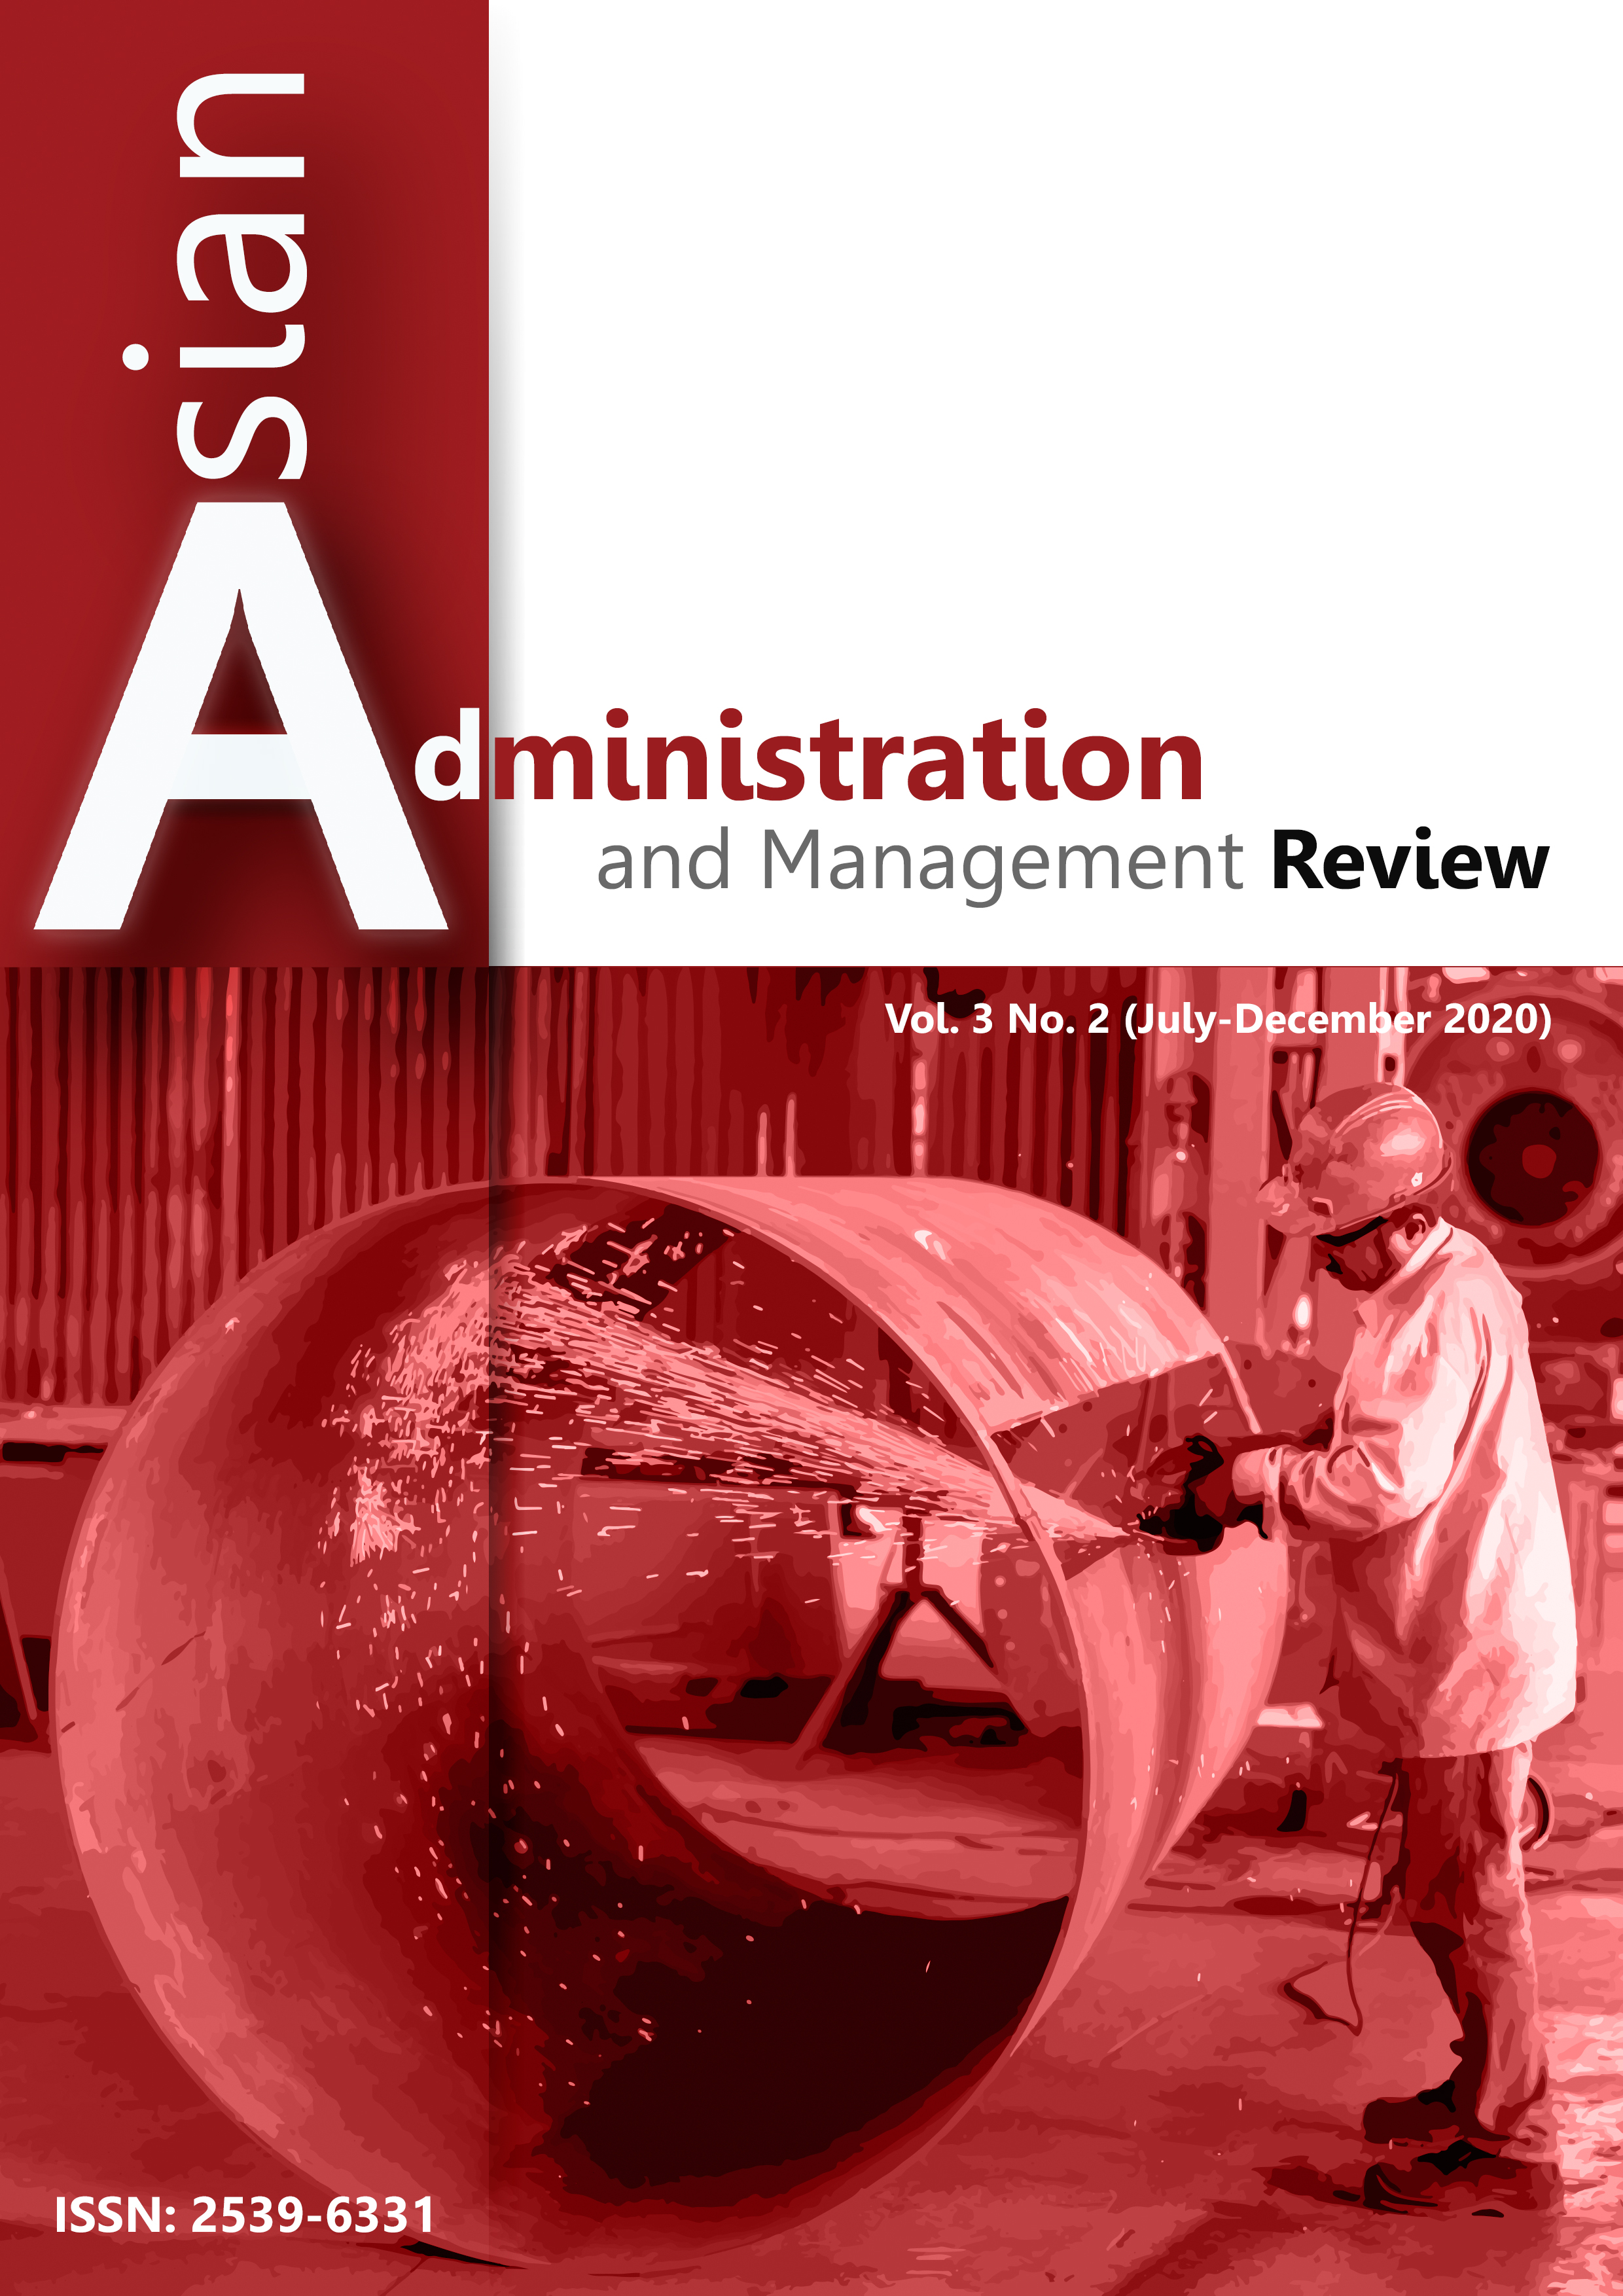 					View Vol. 3 No. 2 (2020): Asian Administration and Management Review
				